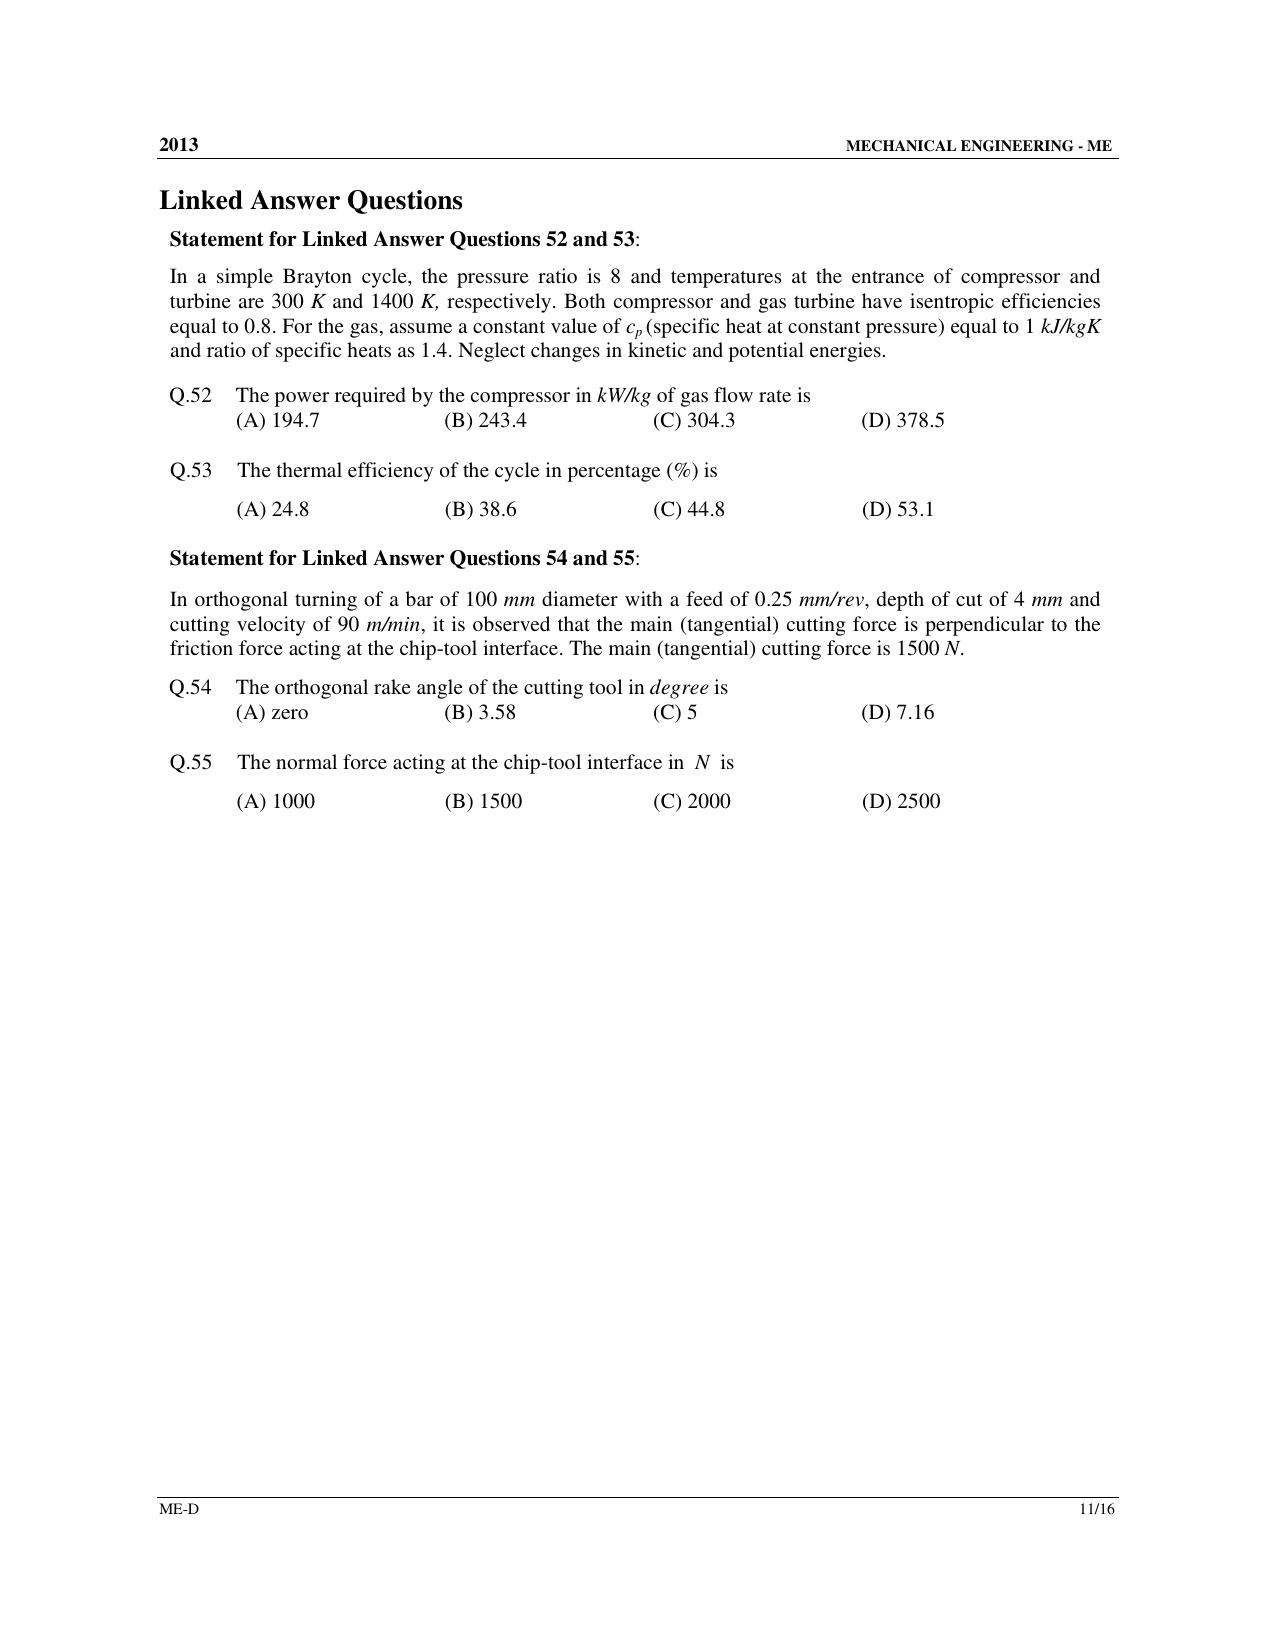 GATE 2013 Mechanical Engineering (ME) Question Paper with Answer Key - Page 54